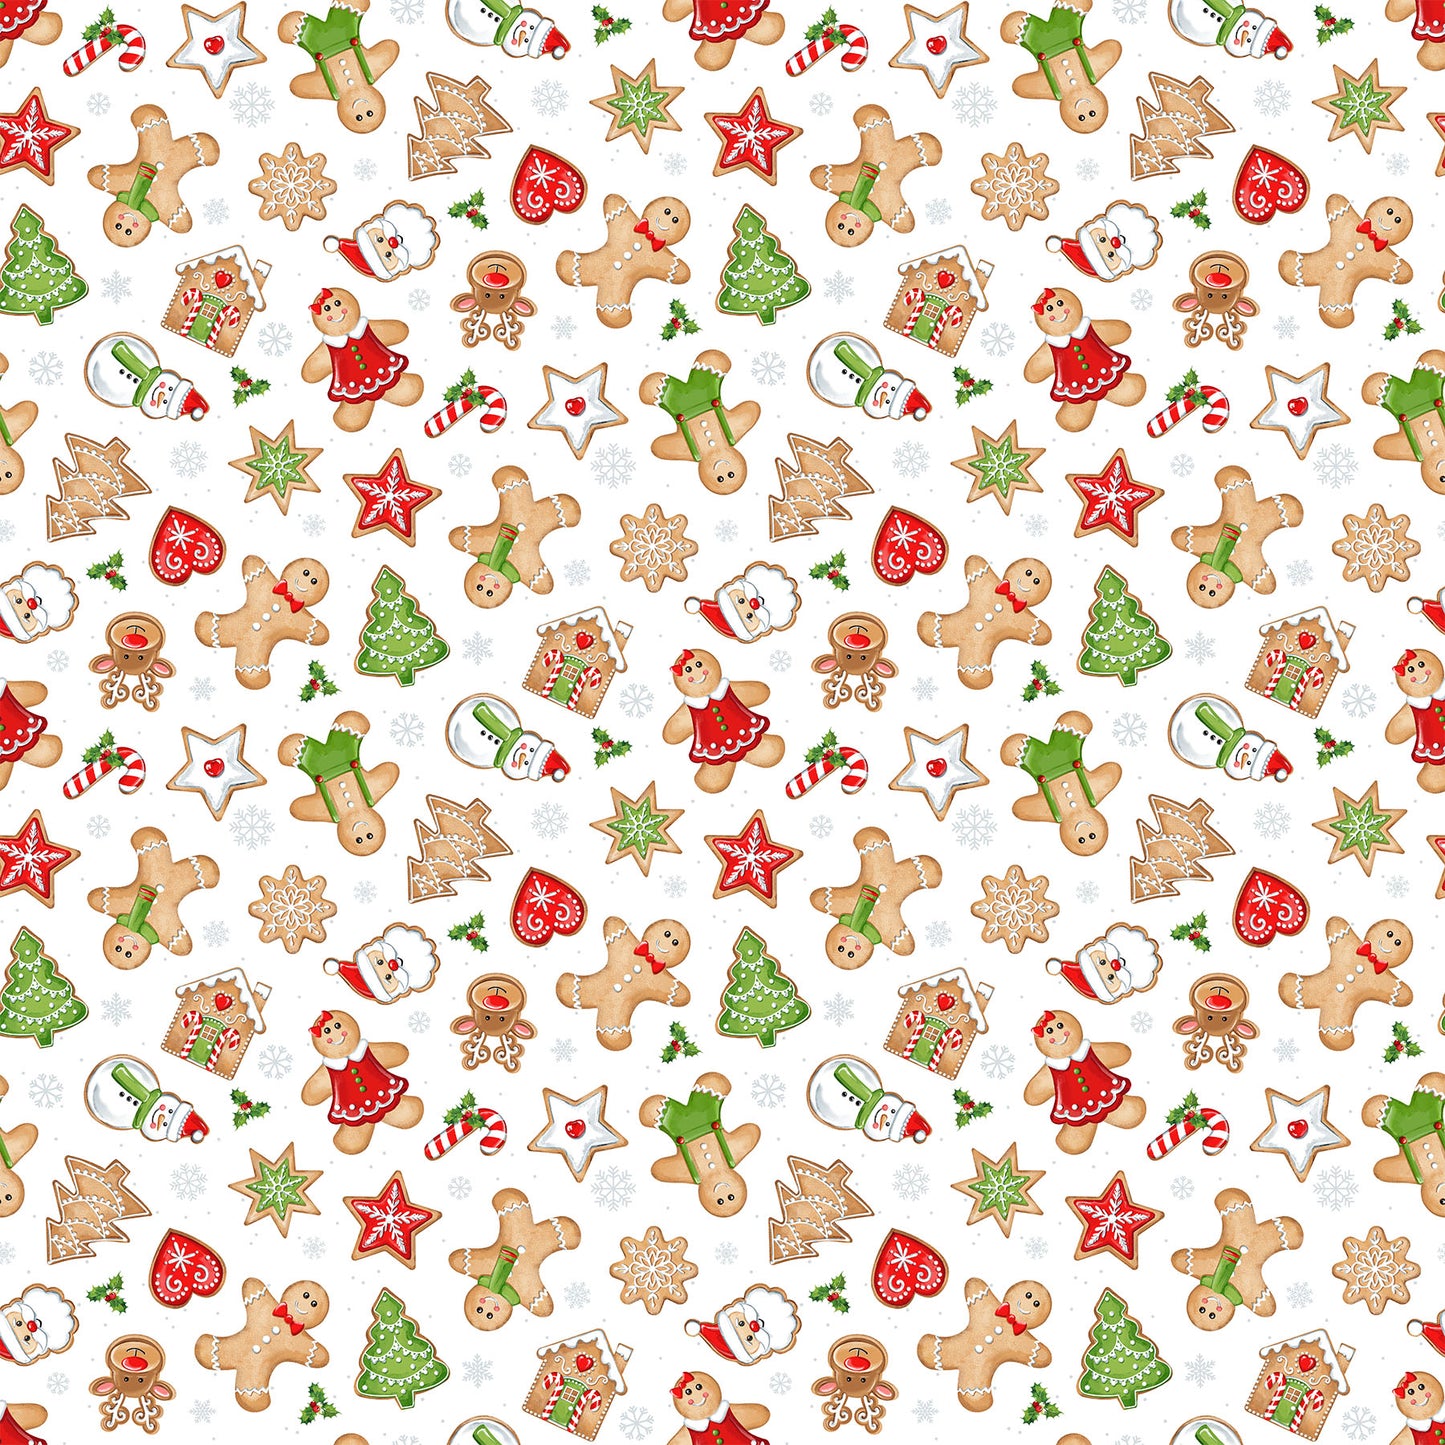 New Arrival: Sugar Coated Digital by Deborah Edwards White/Multi DP27143-10 Cotton Woven Fabric